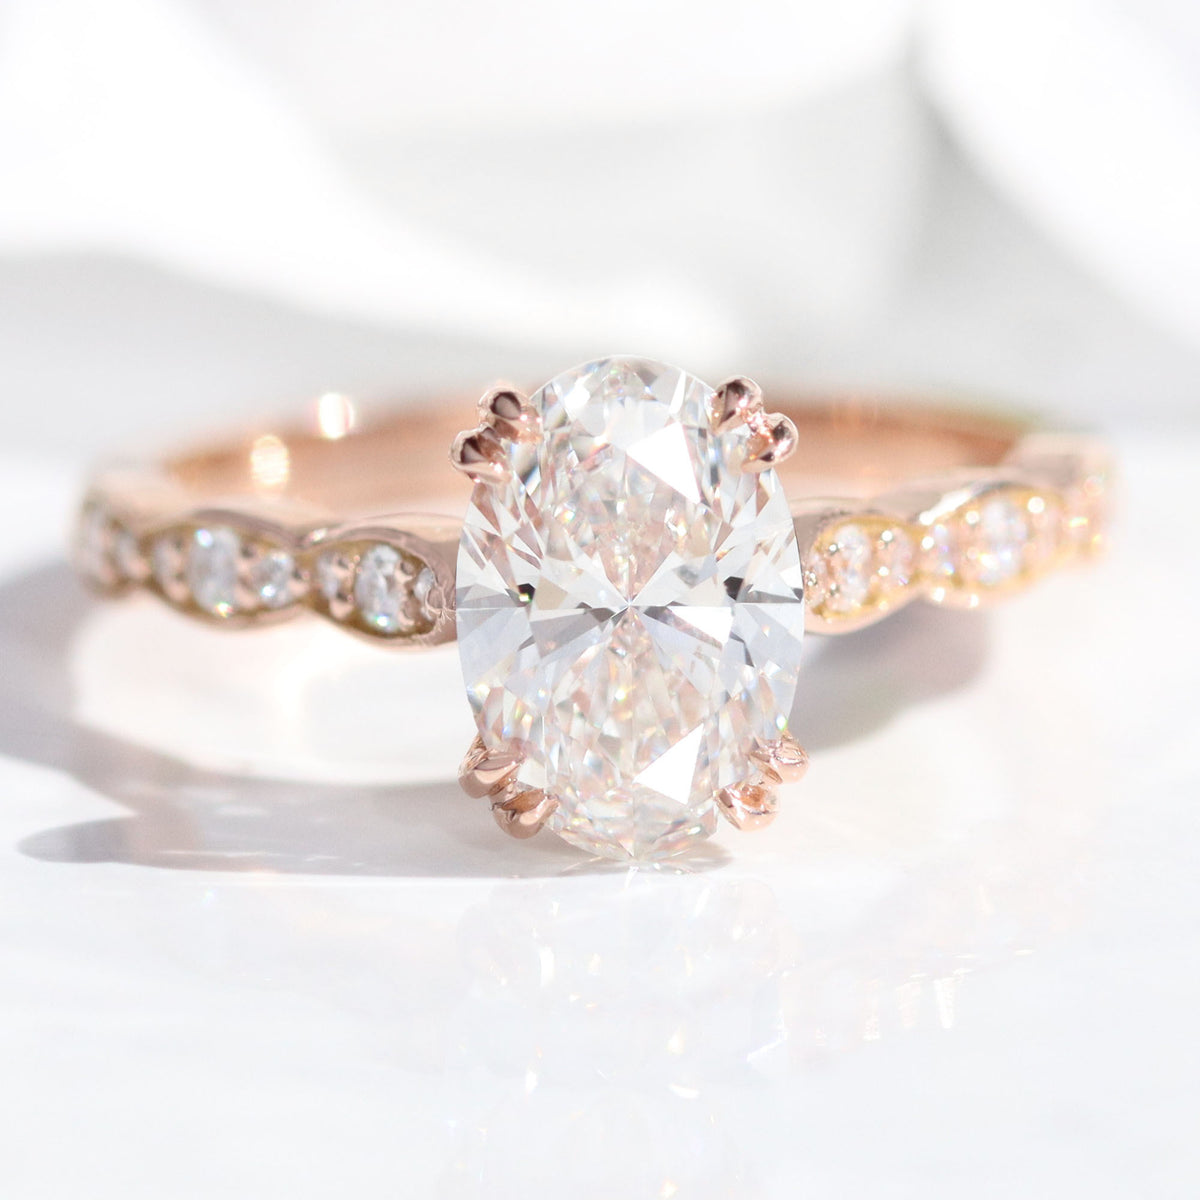 lab diamond ring rose gold oval diamond solitaire engagement ring La More Design Jewelry